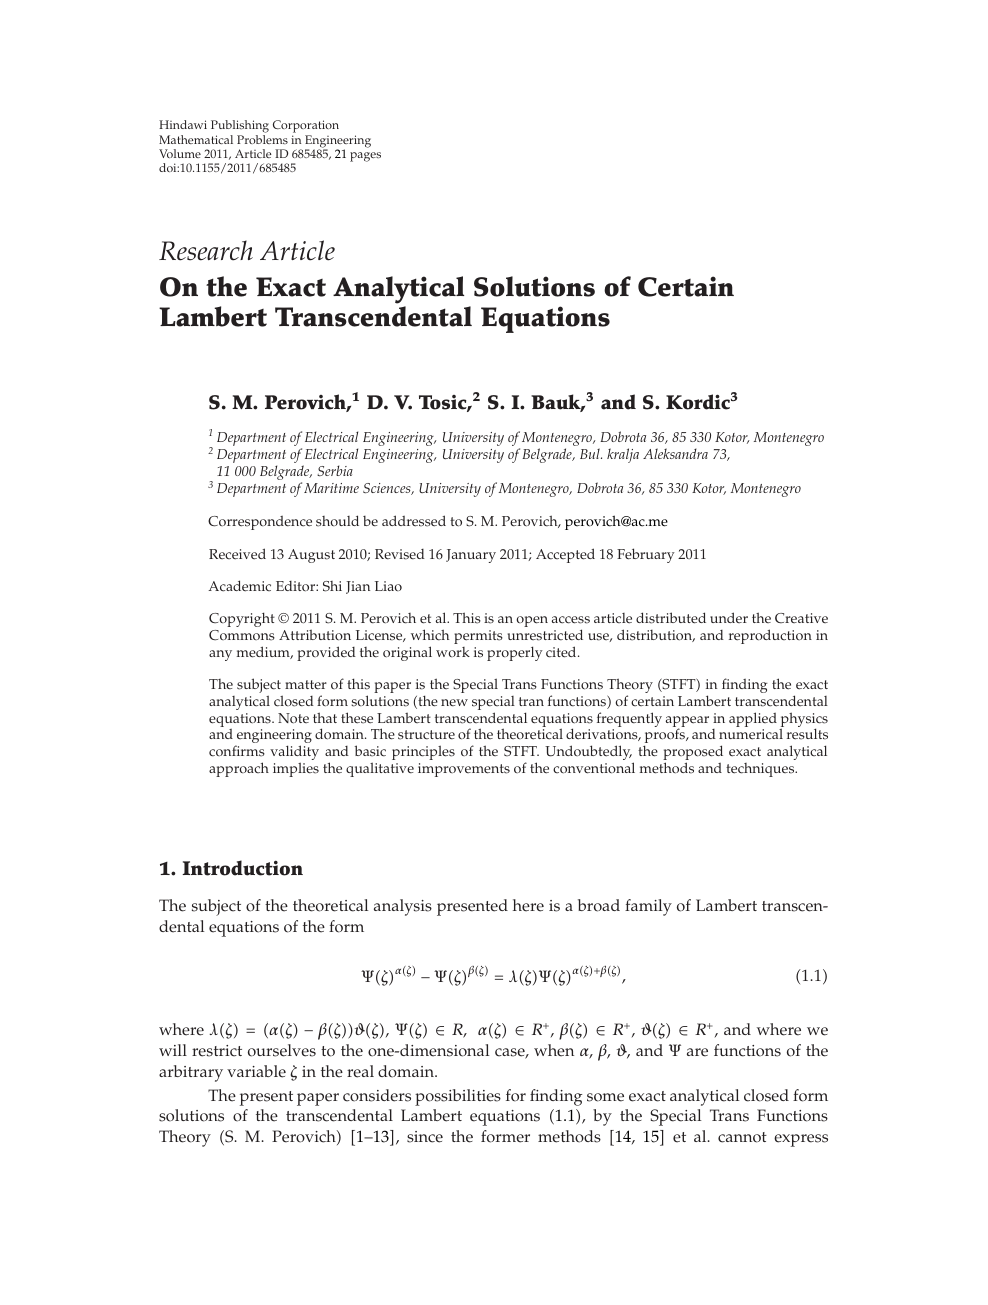 On The Exact Analytical Solutions Of Certain Lambert Transcendental Equations Topic Of Research Paper In Mathematics Download Scholarly Article Pdf And Read For Free On Cyberleninka Open Science Hub